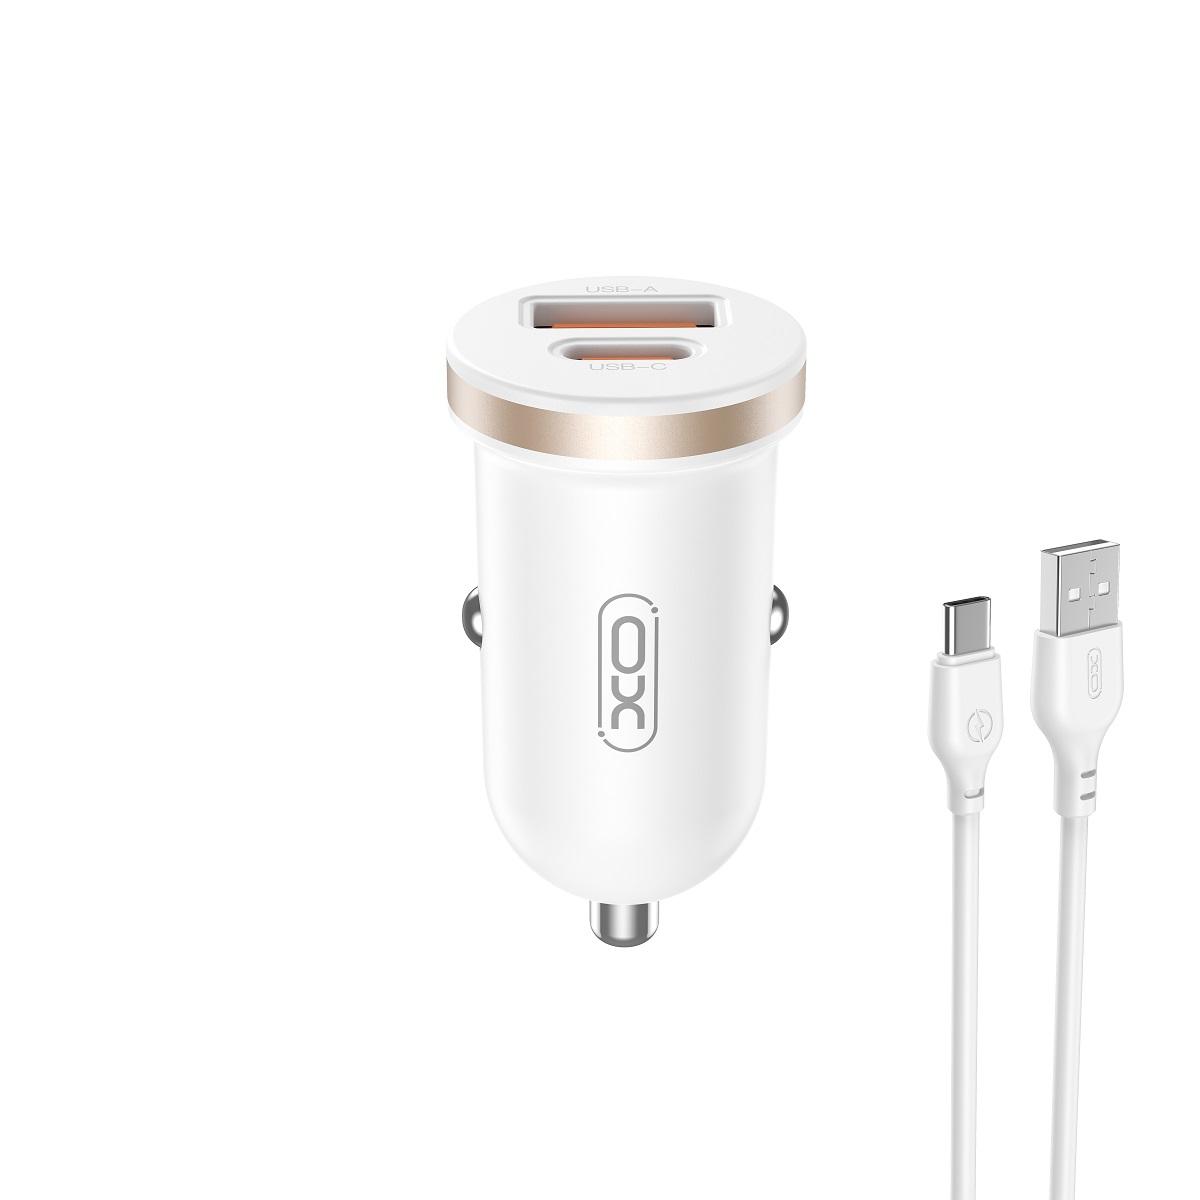 XO car charger CC56 PD 30W QC 1x USB 1x USB-C white + USB - USB-C cable